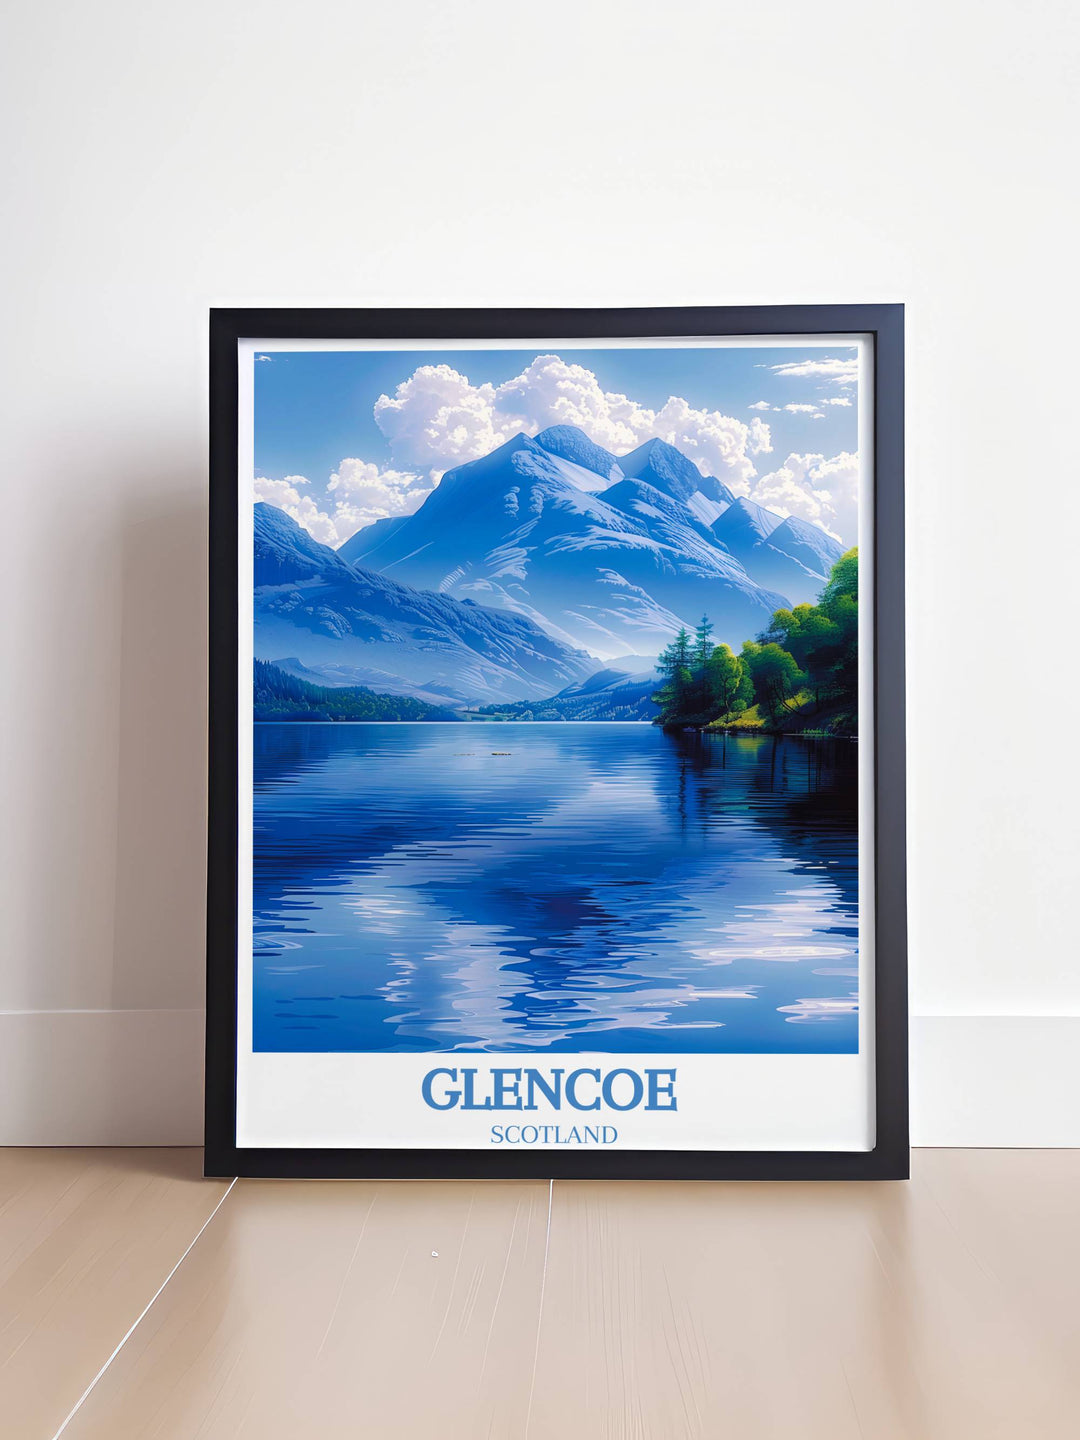 Europe travel posters proudly present the mystic allure of Glencoe, showcasing Scotland's dramatic landscapes and rich cultural heritage in vivid detail.